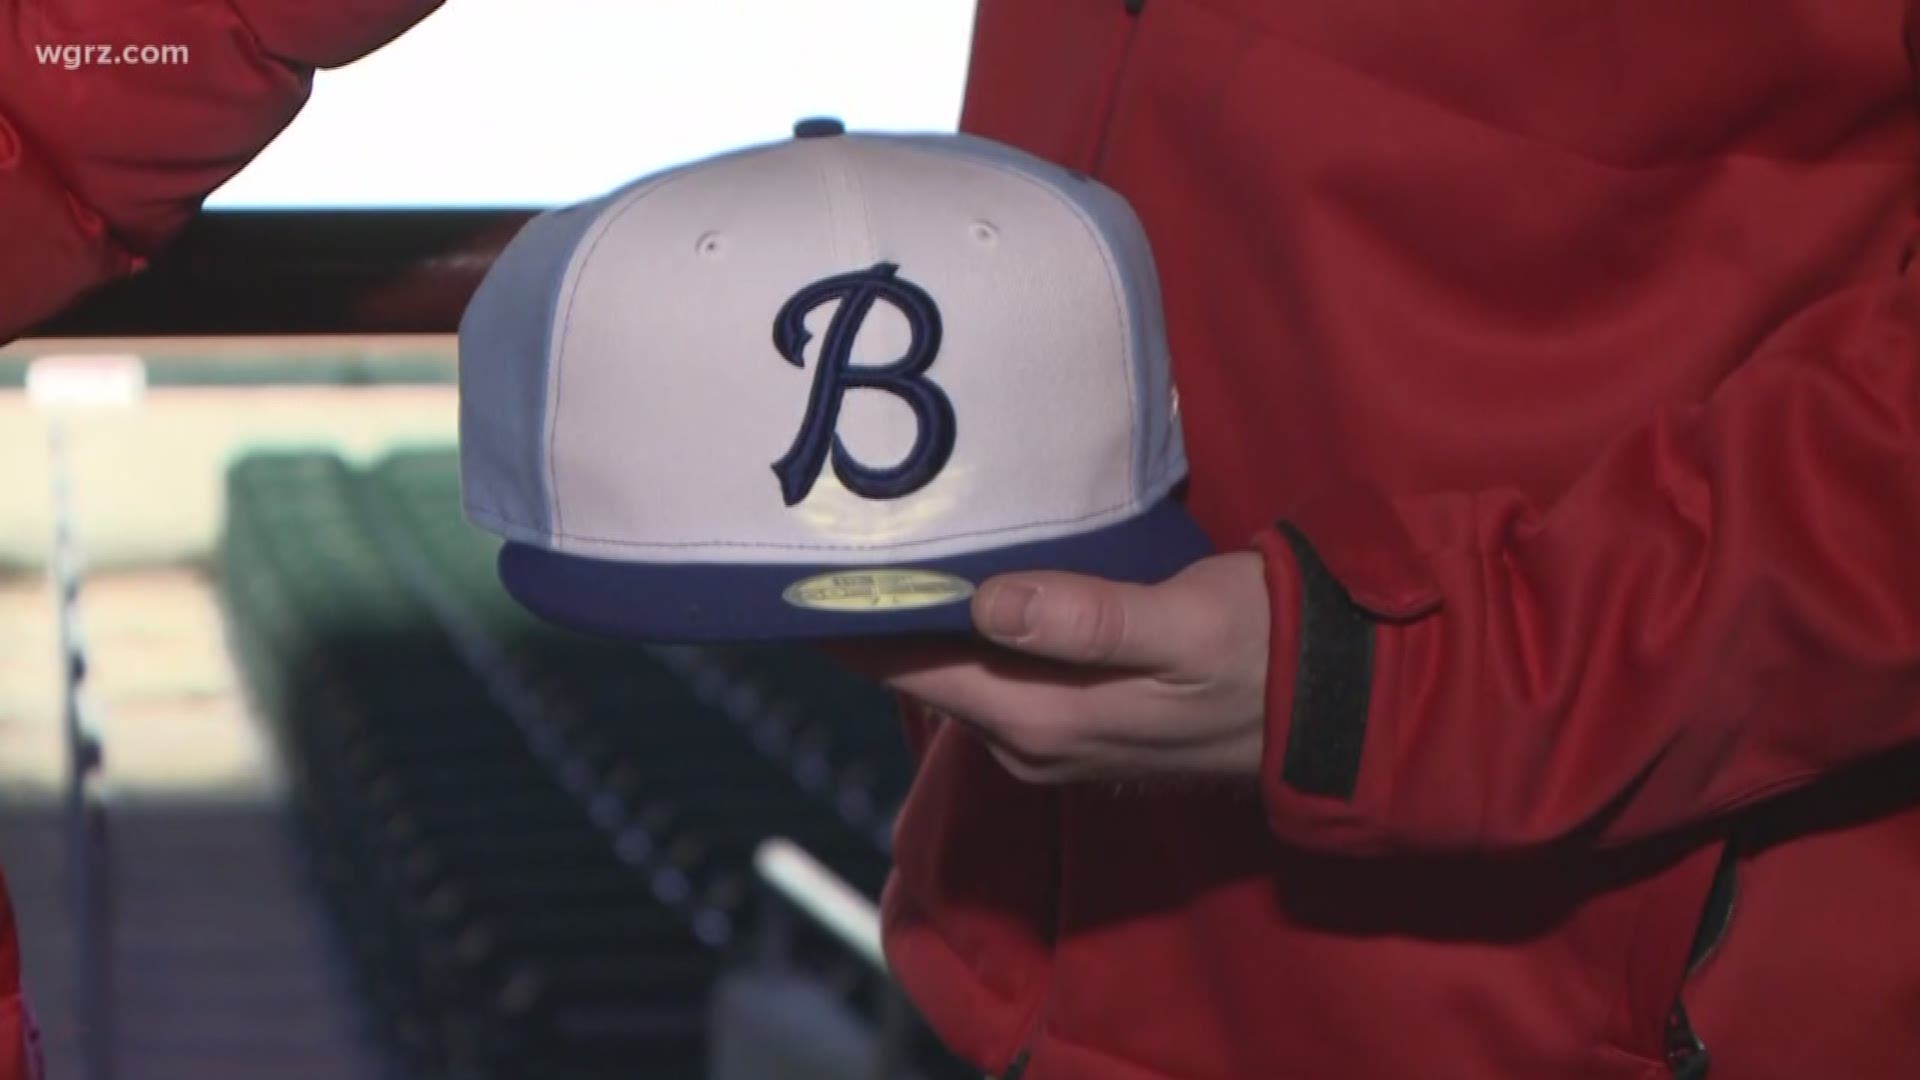 The Bisons are adding a new hat to their uniforms for this season